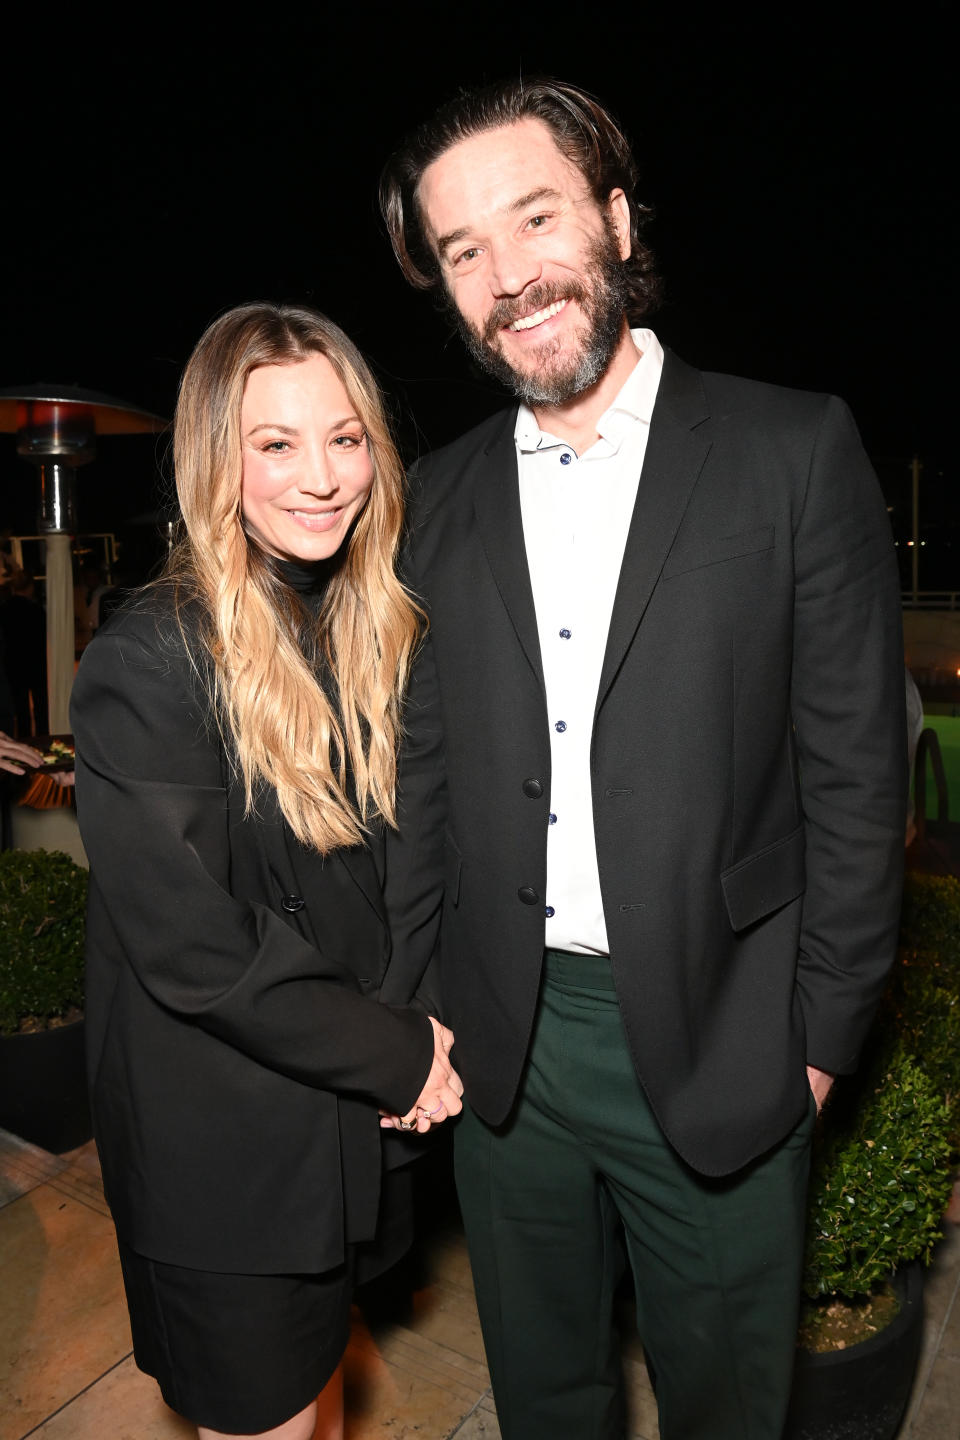 LOS ANGELES, CALIFORNIA - DECEMBER 01: (L-R) Kaley Cuoco and Tom Pelphrey attend "Lawmen: Bass Reeves" Los Angeles Party at Sunset Tower Hotel on December 01, 2023 in Los Angeles, California. (Photo by Jon Kopaloff/Getty Images for Paramount+)